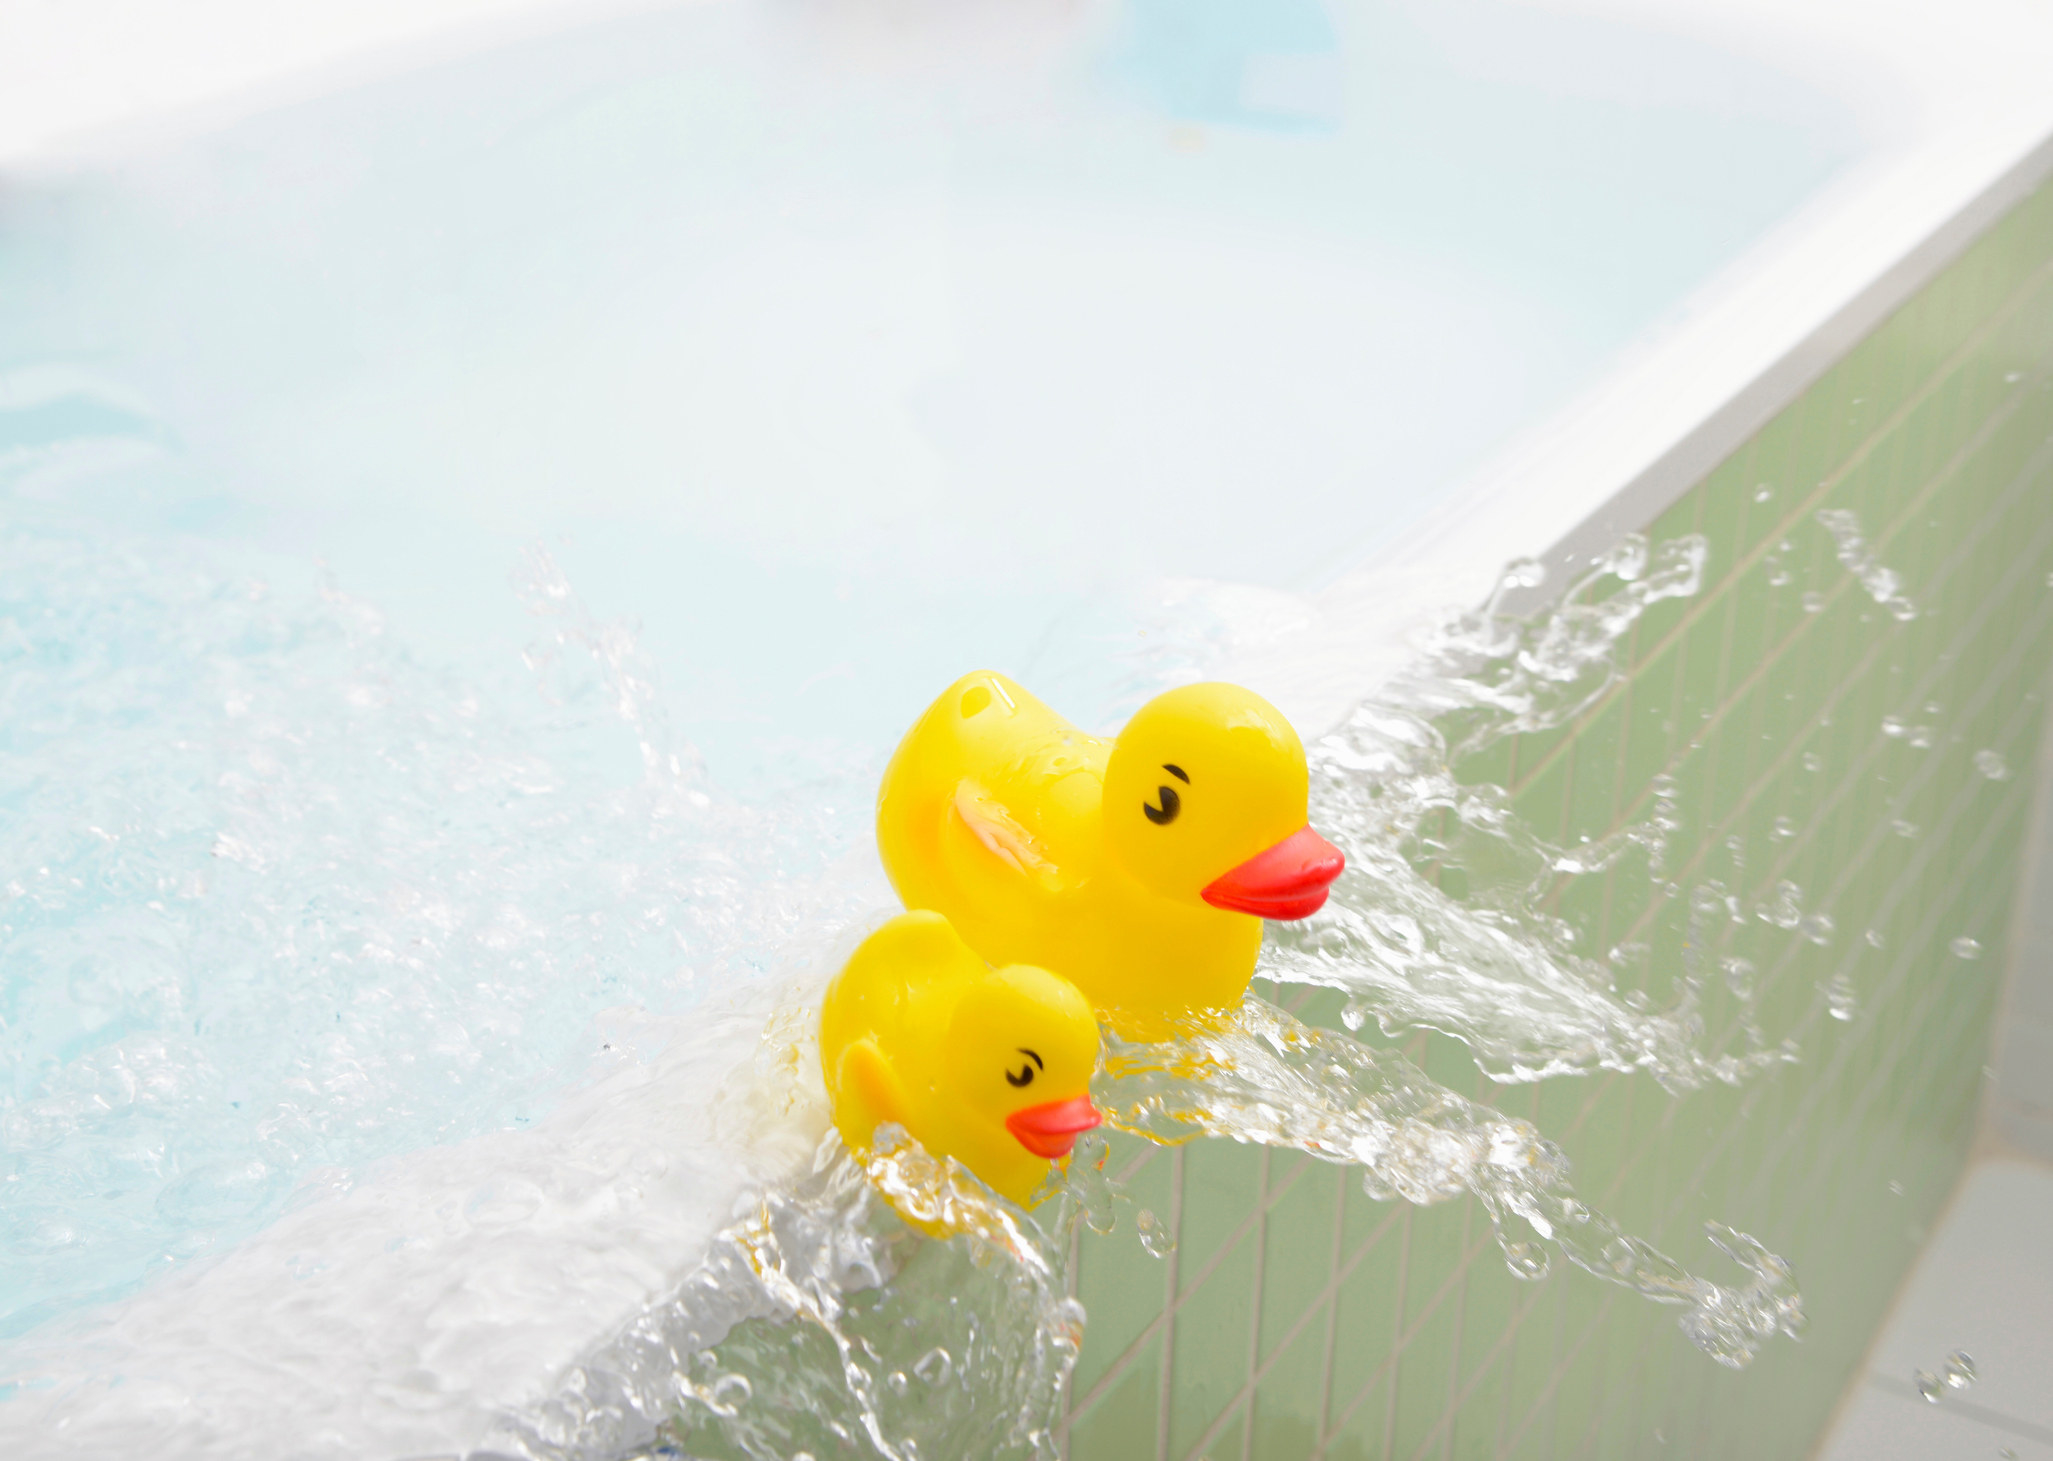 Rubber ducks falling out of bath overflowing with water